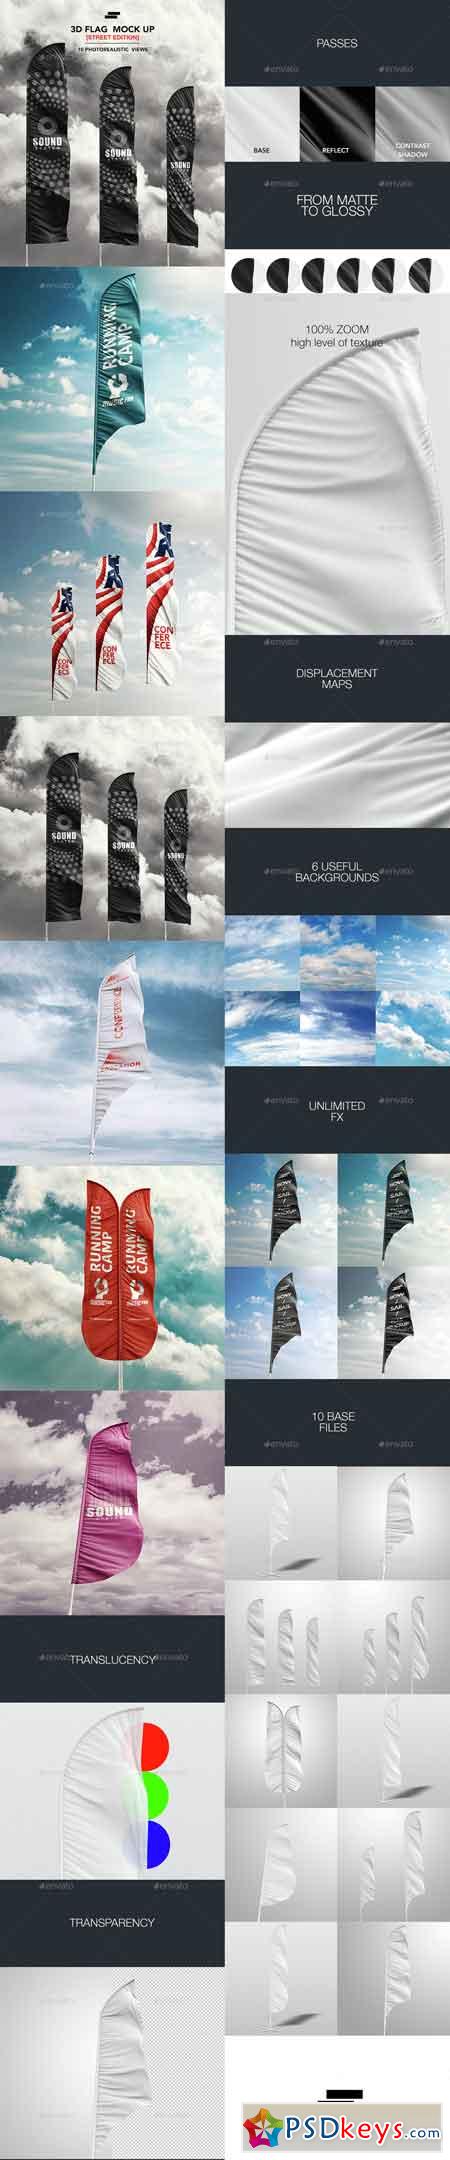 Download 3d Feather Flags Bow Sail Flag Mockup 14621793 Free Download Photoshop Vector Stock Image Via Torrent Zippyshare From Psdkeys Com